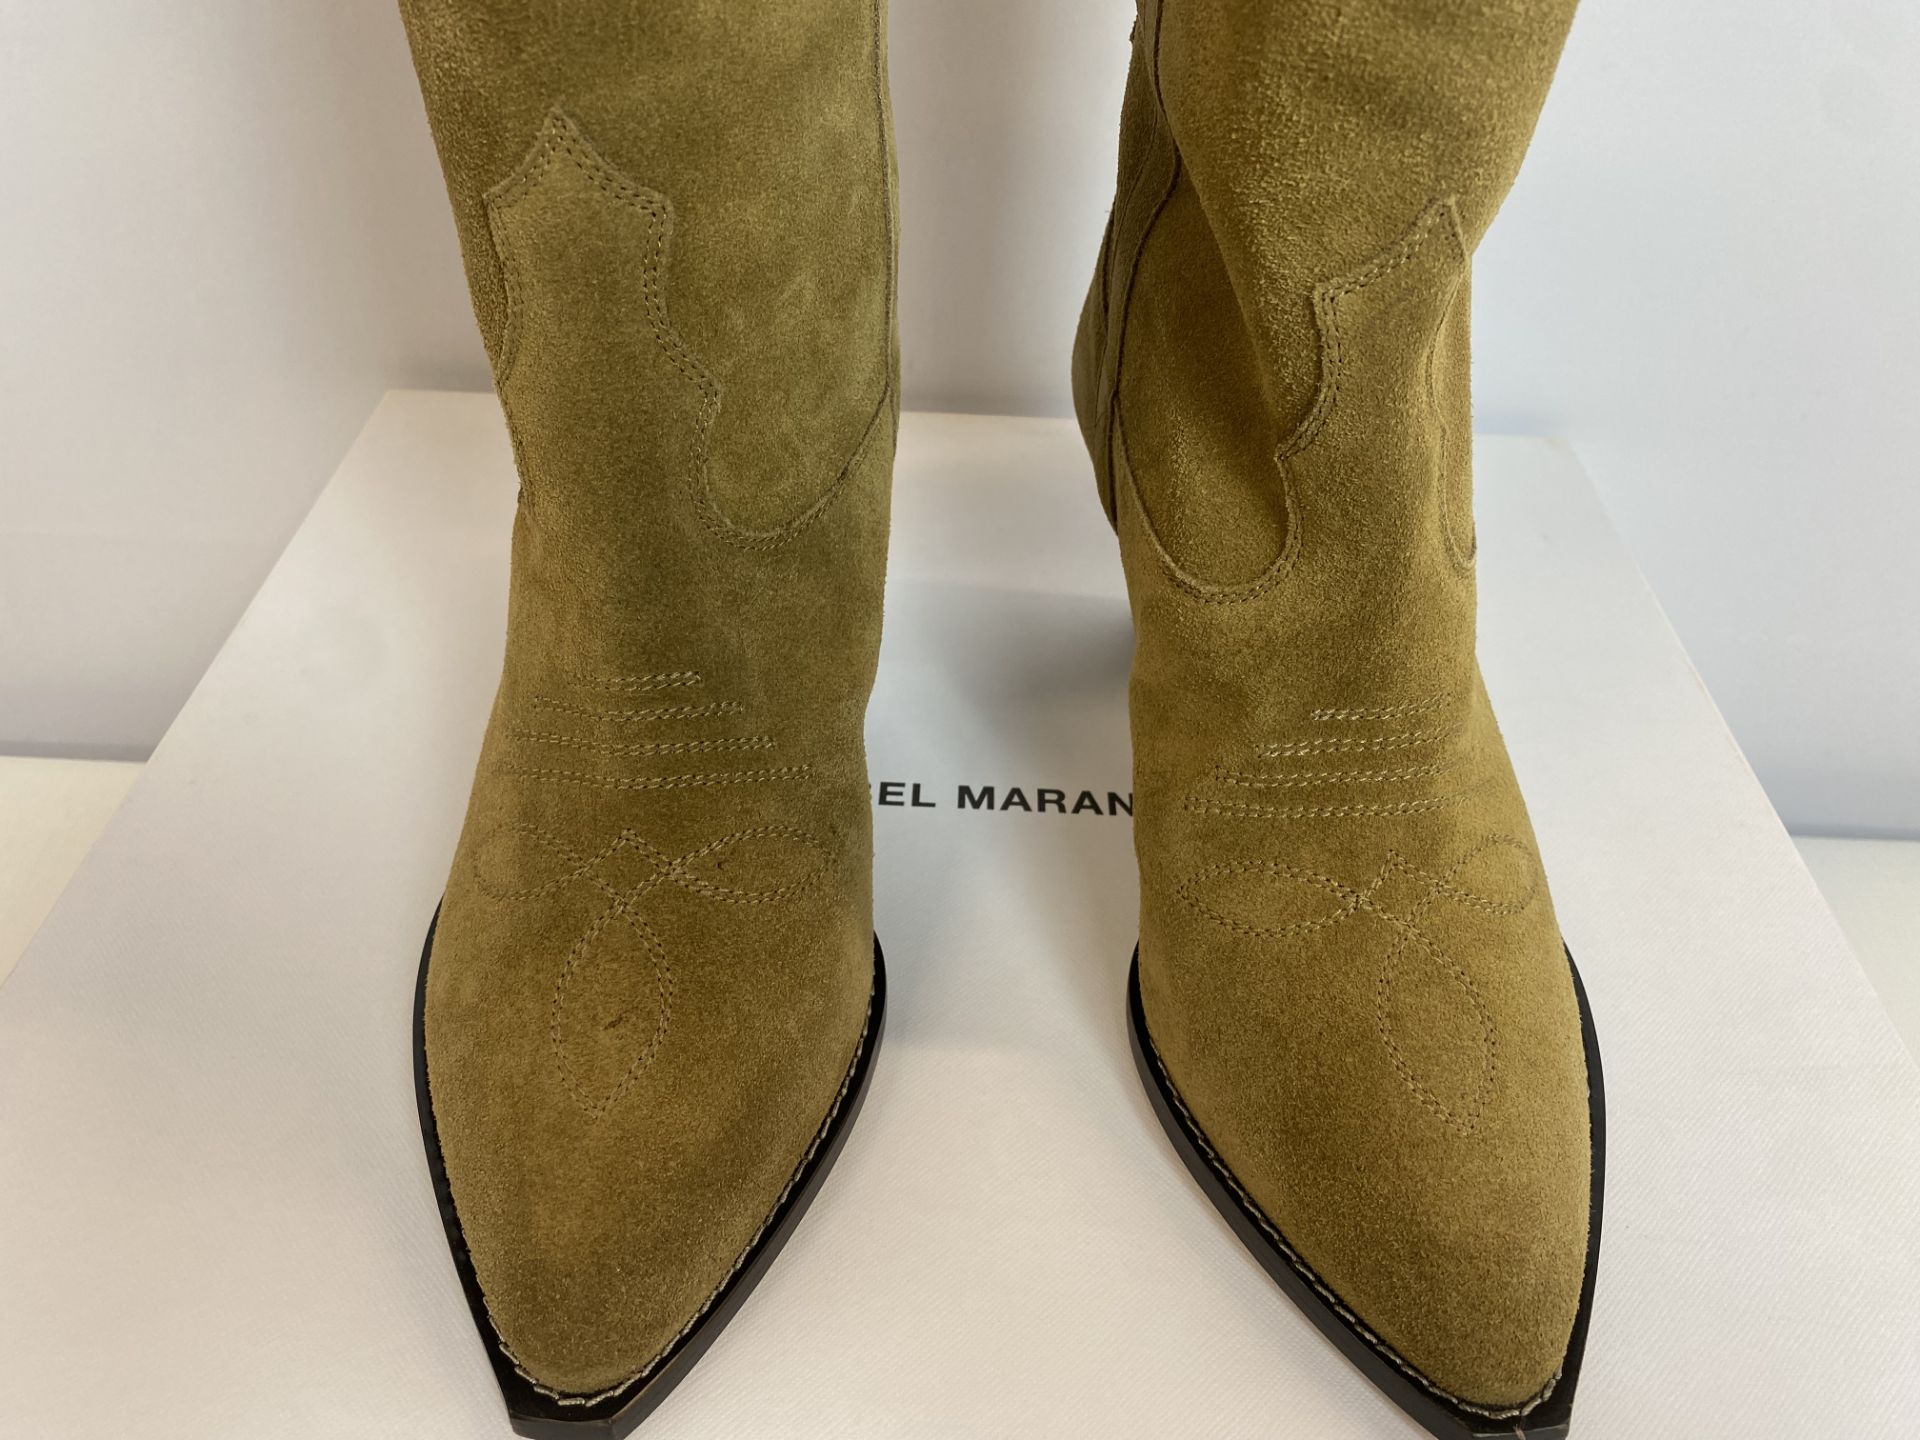 Isabel Marant Boot Luliette Suede Boot Feminine Size: 37 Taupe, Retail Price: $1250 - Image 4 of 4